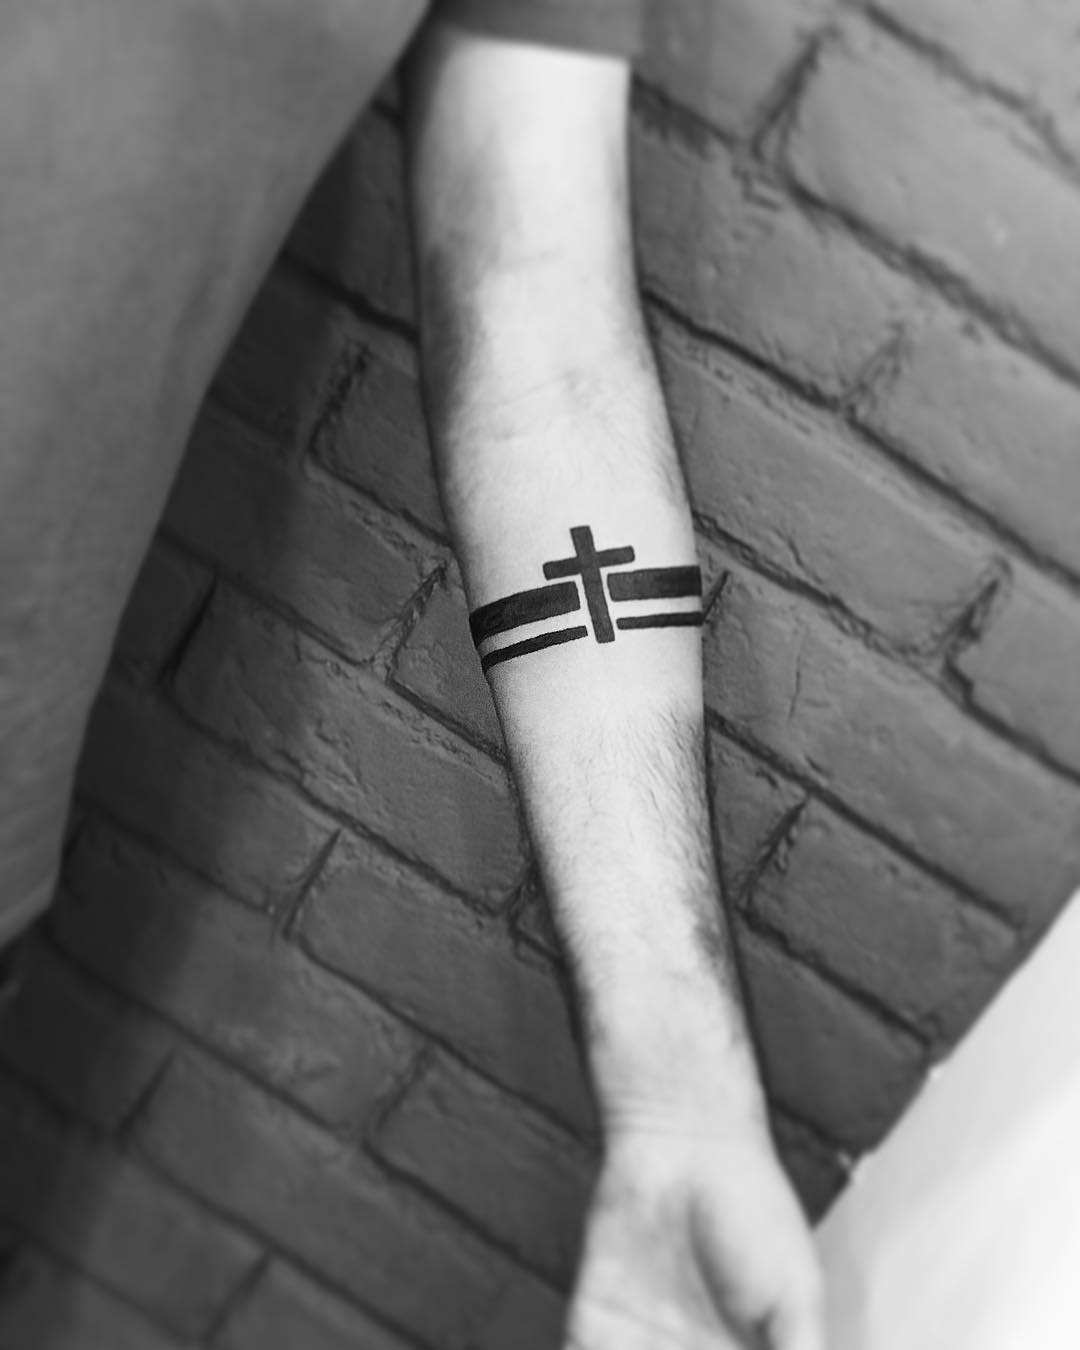 225 Best Cross Tattoo Designs With Meanings with measurements 1080 X 1350